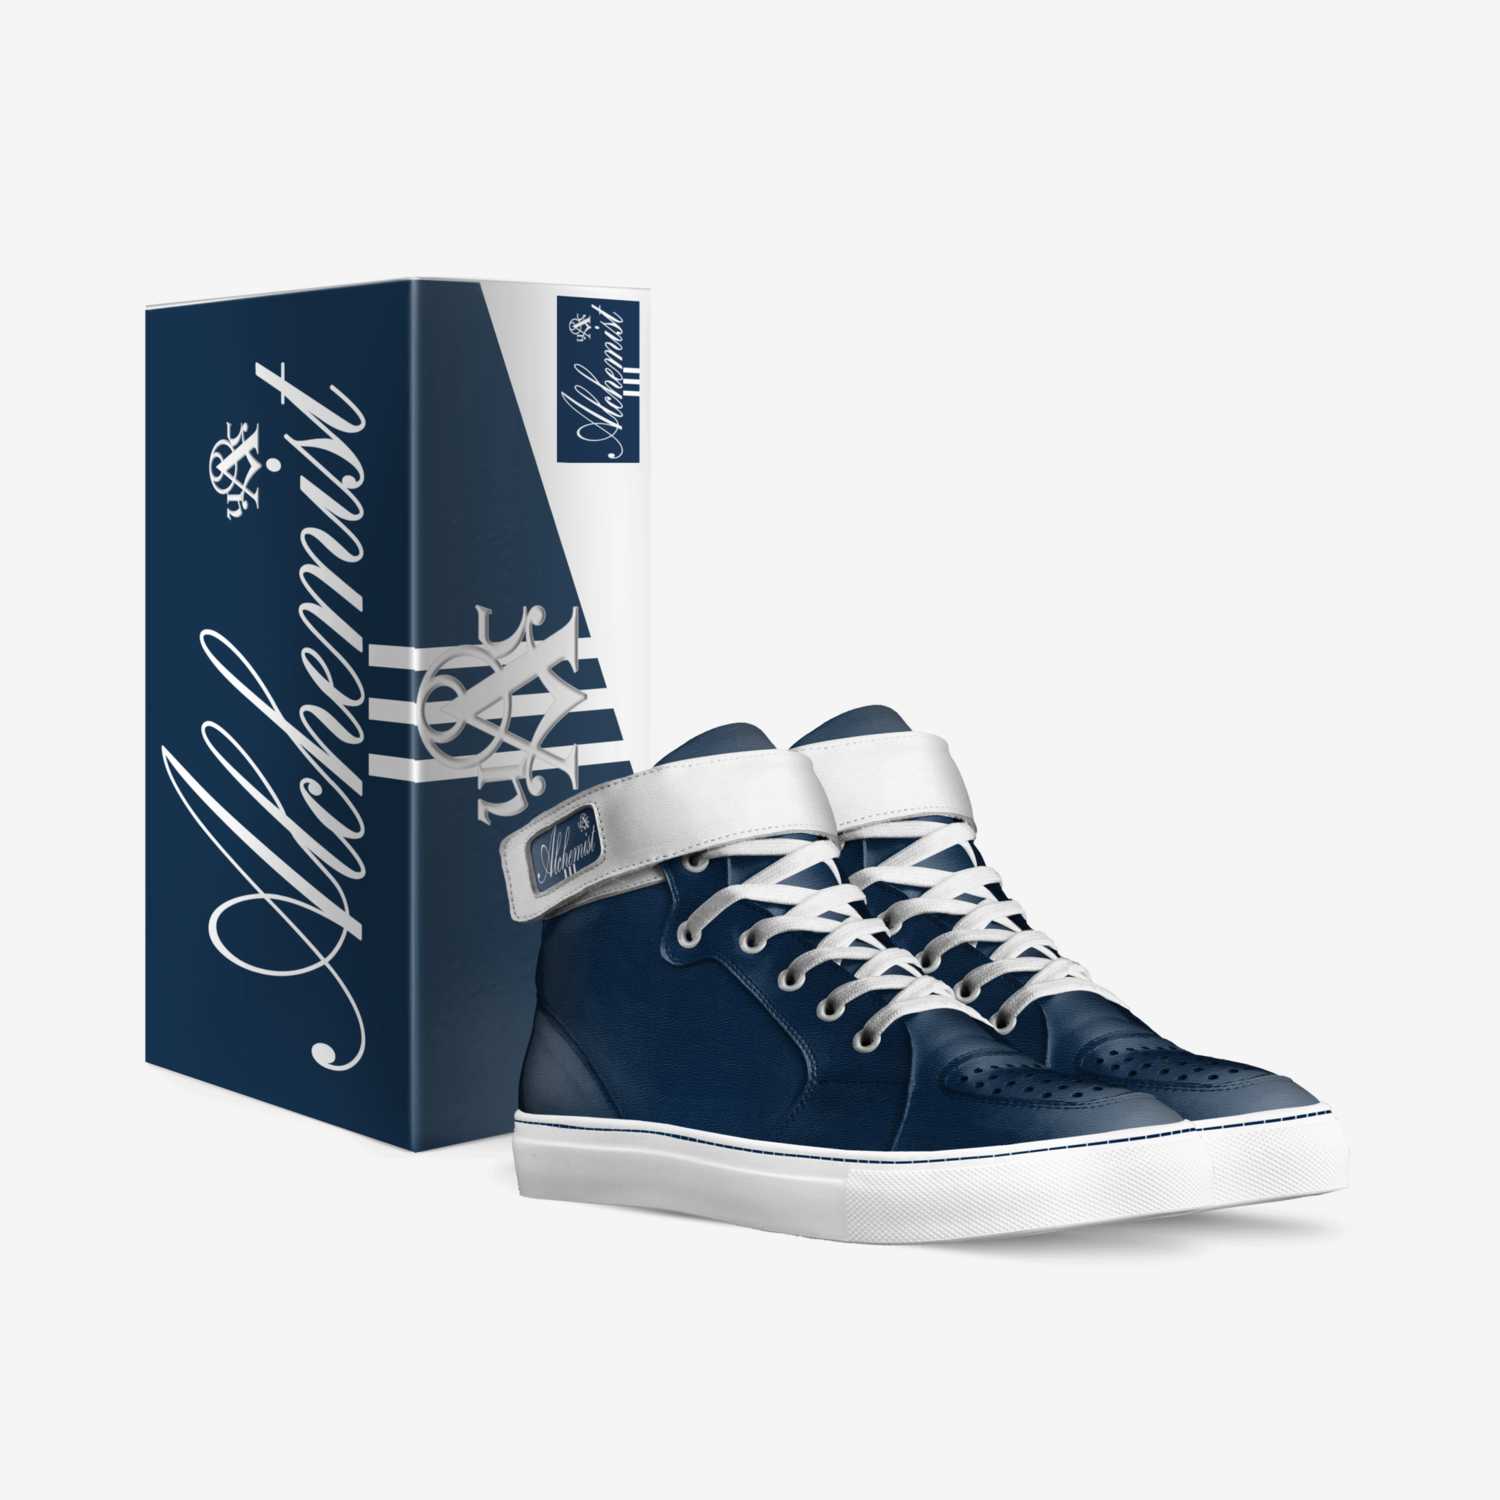 Blue Magic 2 custom made in Italy shoes by Urban Alchemist Clothing | Box view